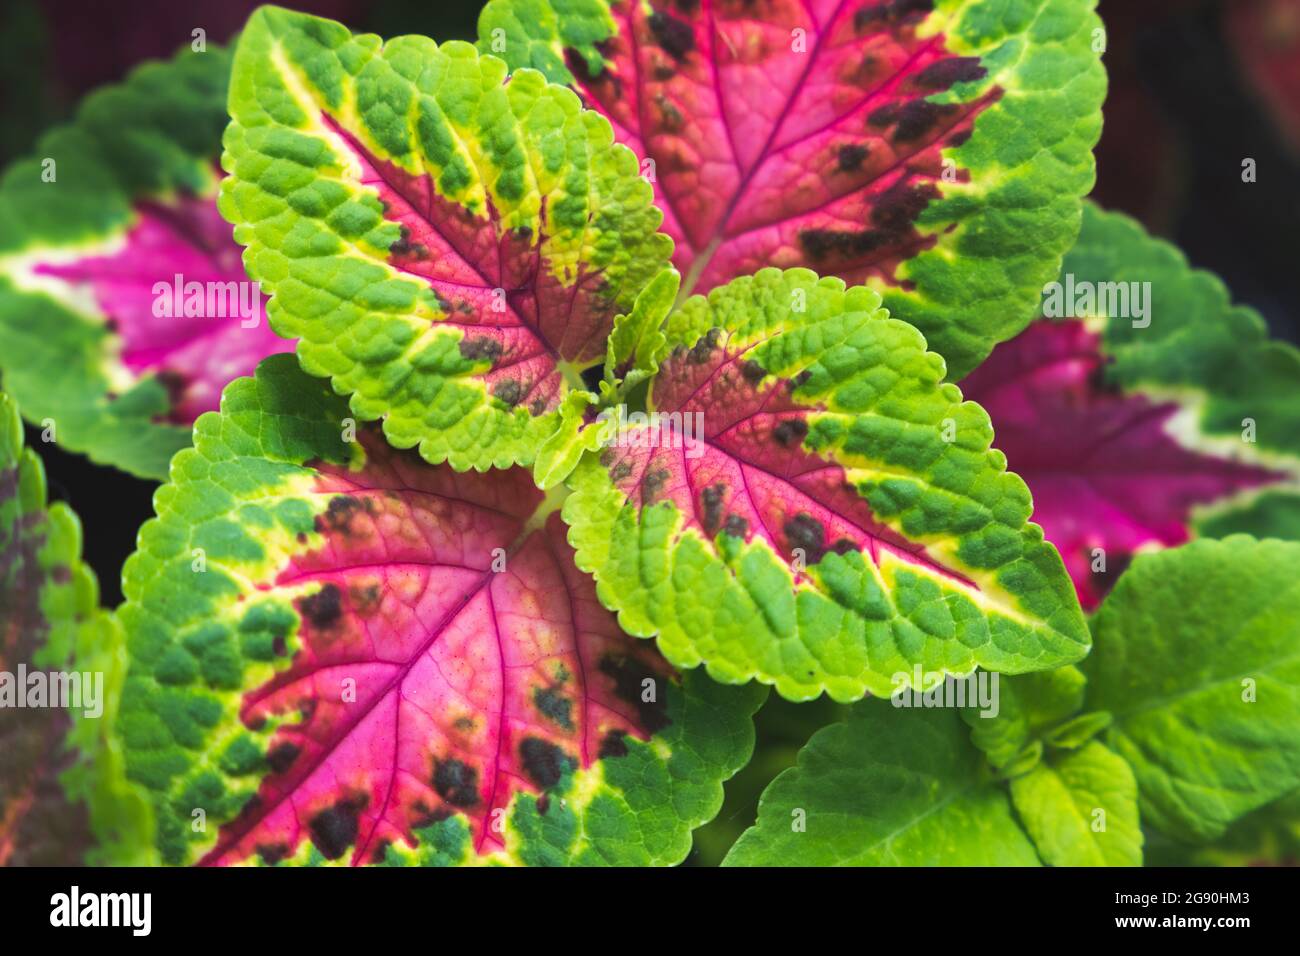 Close up photo of bright colorful leaves of the Coleus scutellarioides decorative plant Stock Photo